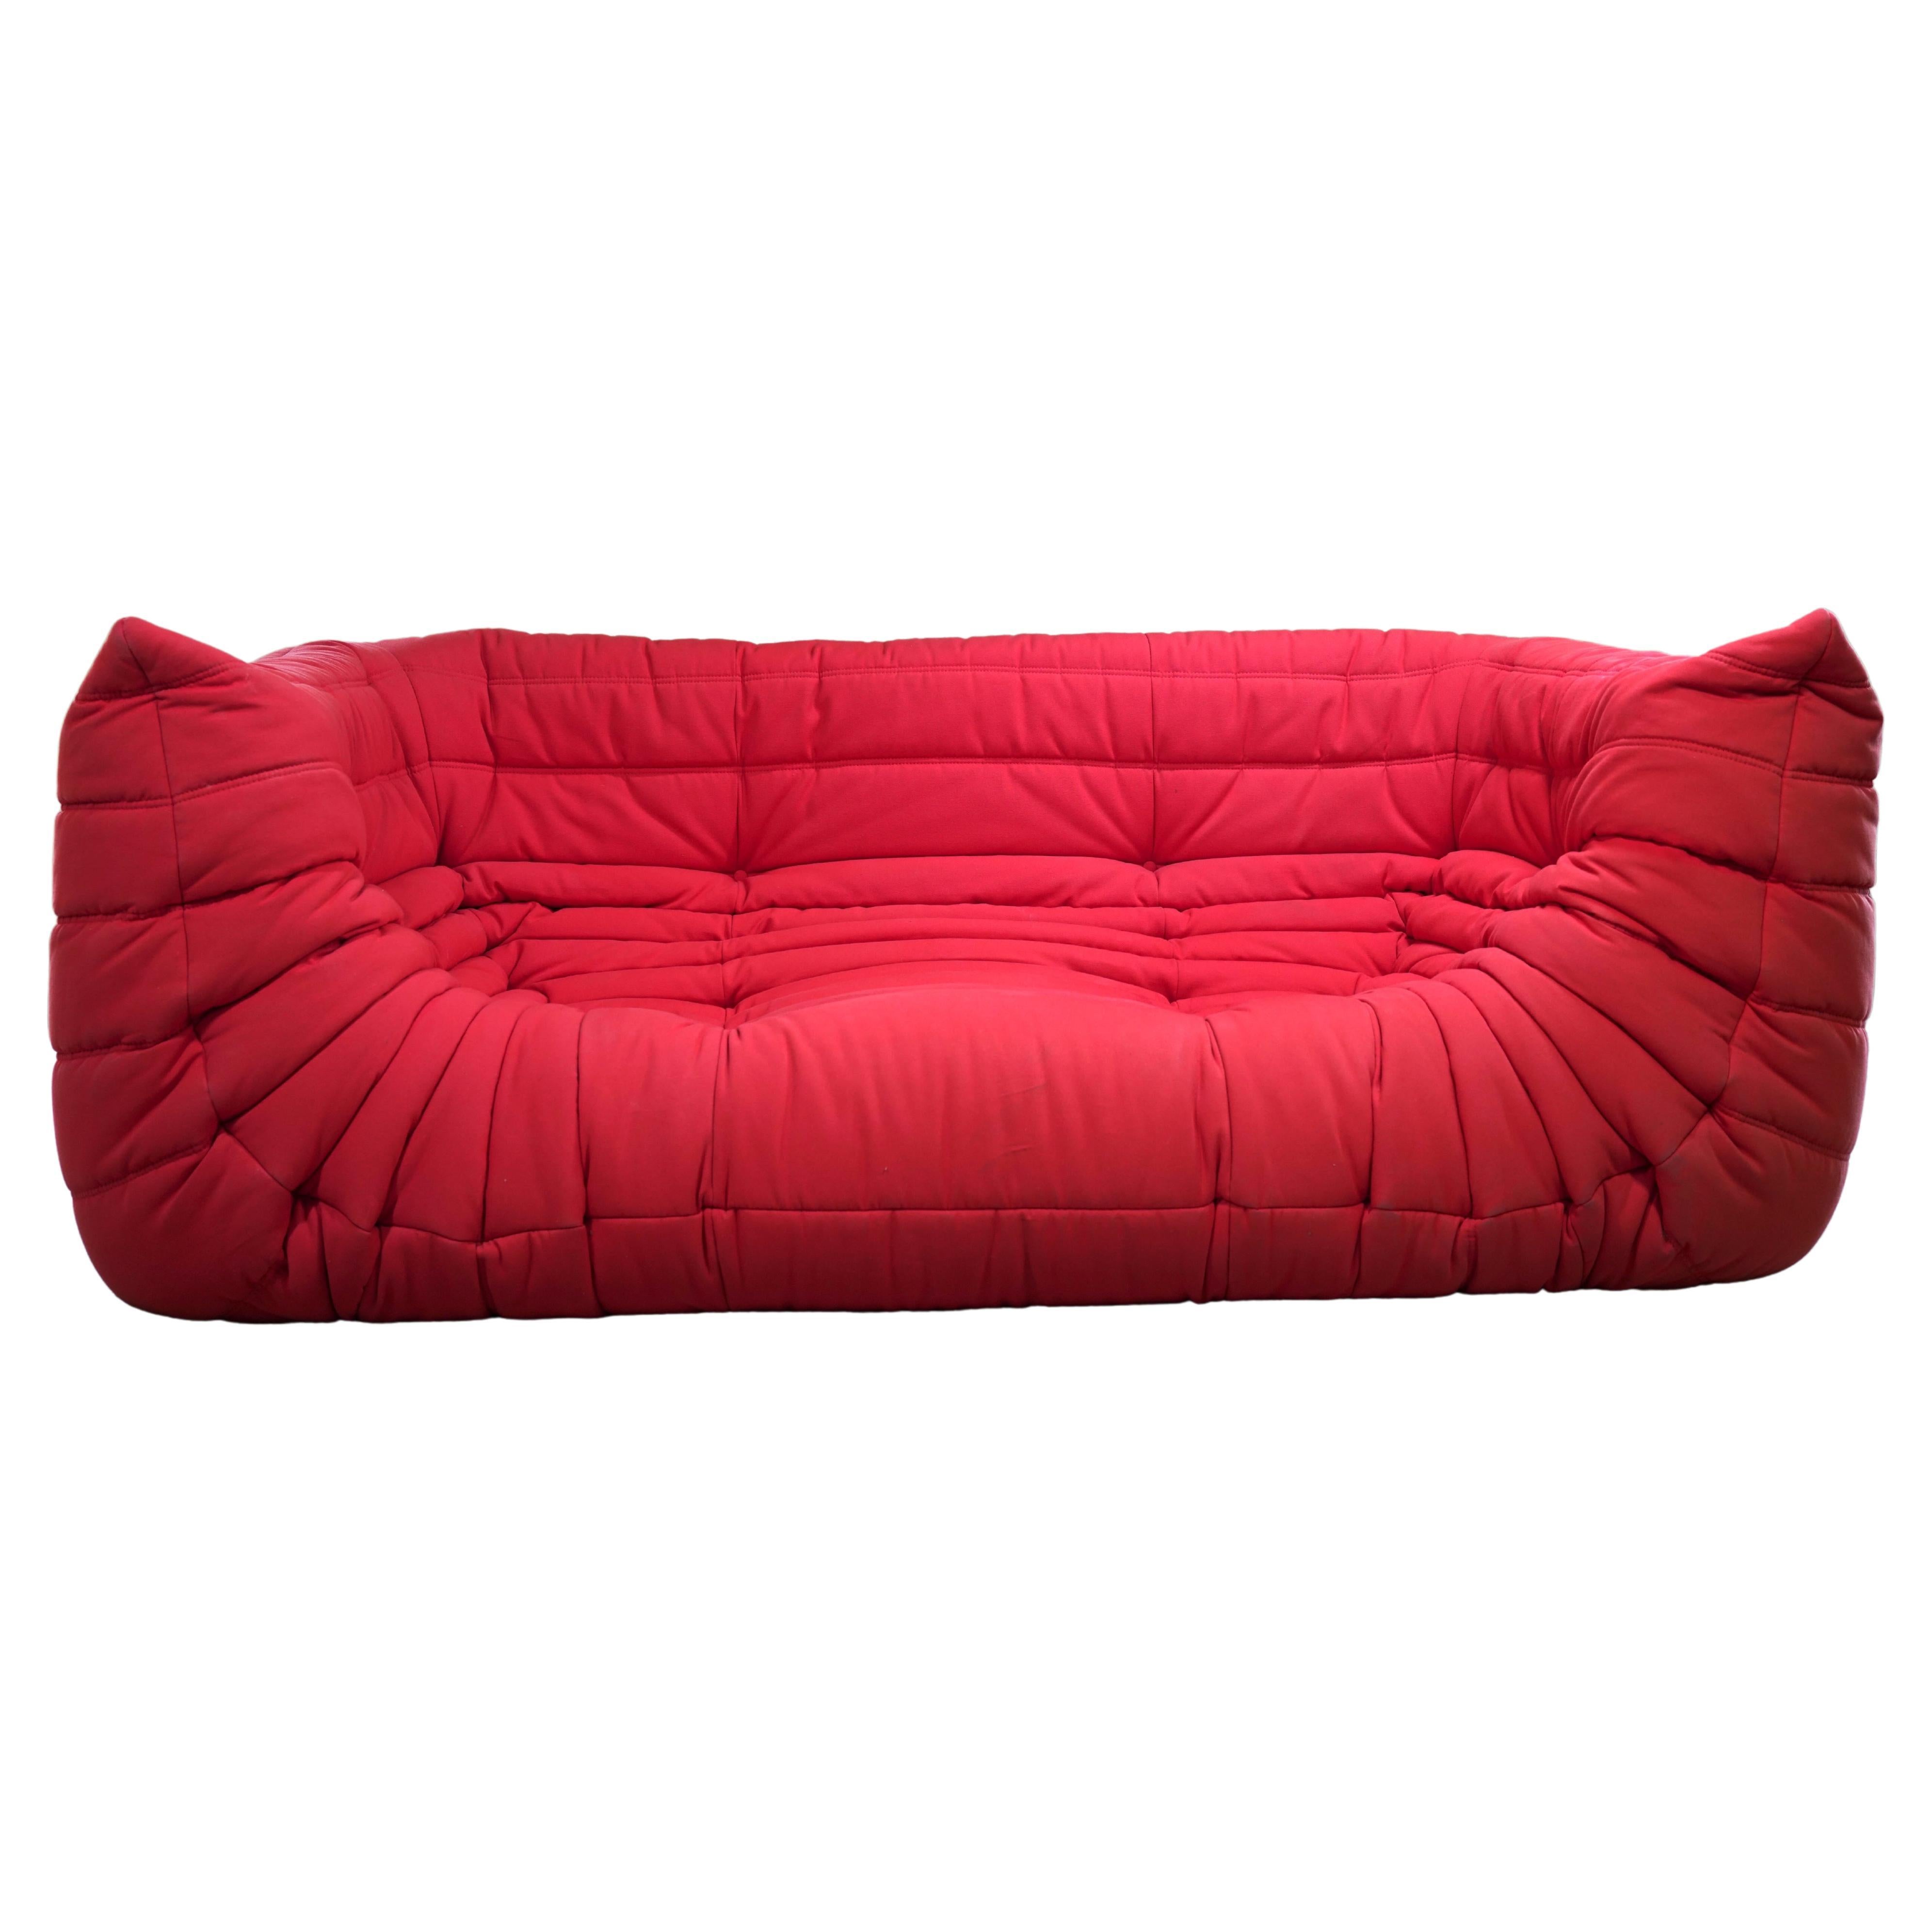 Red Alcantara Three-Seater Togo Sofa with Arms by Ligne Roset, 2006